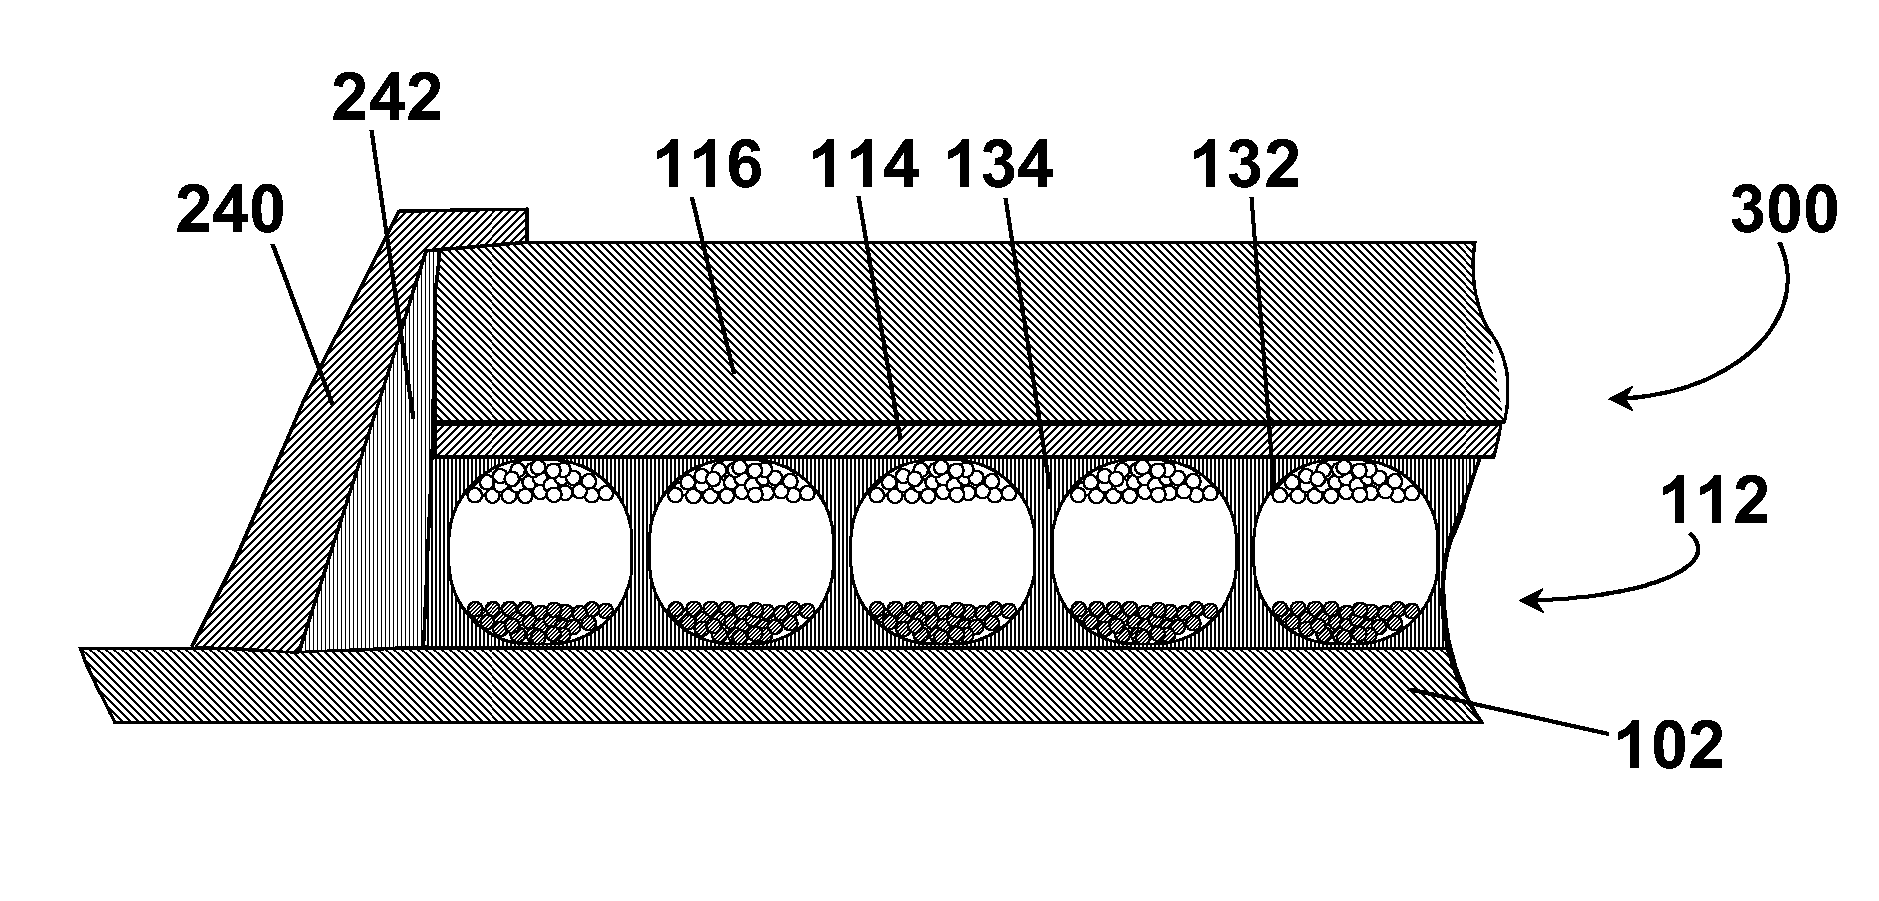 Edge seals for, and processes for assembly of, electro-optic displays